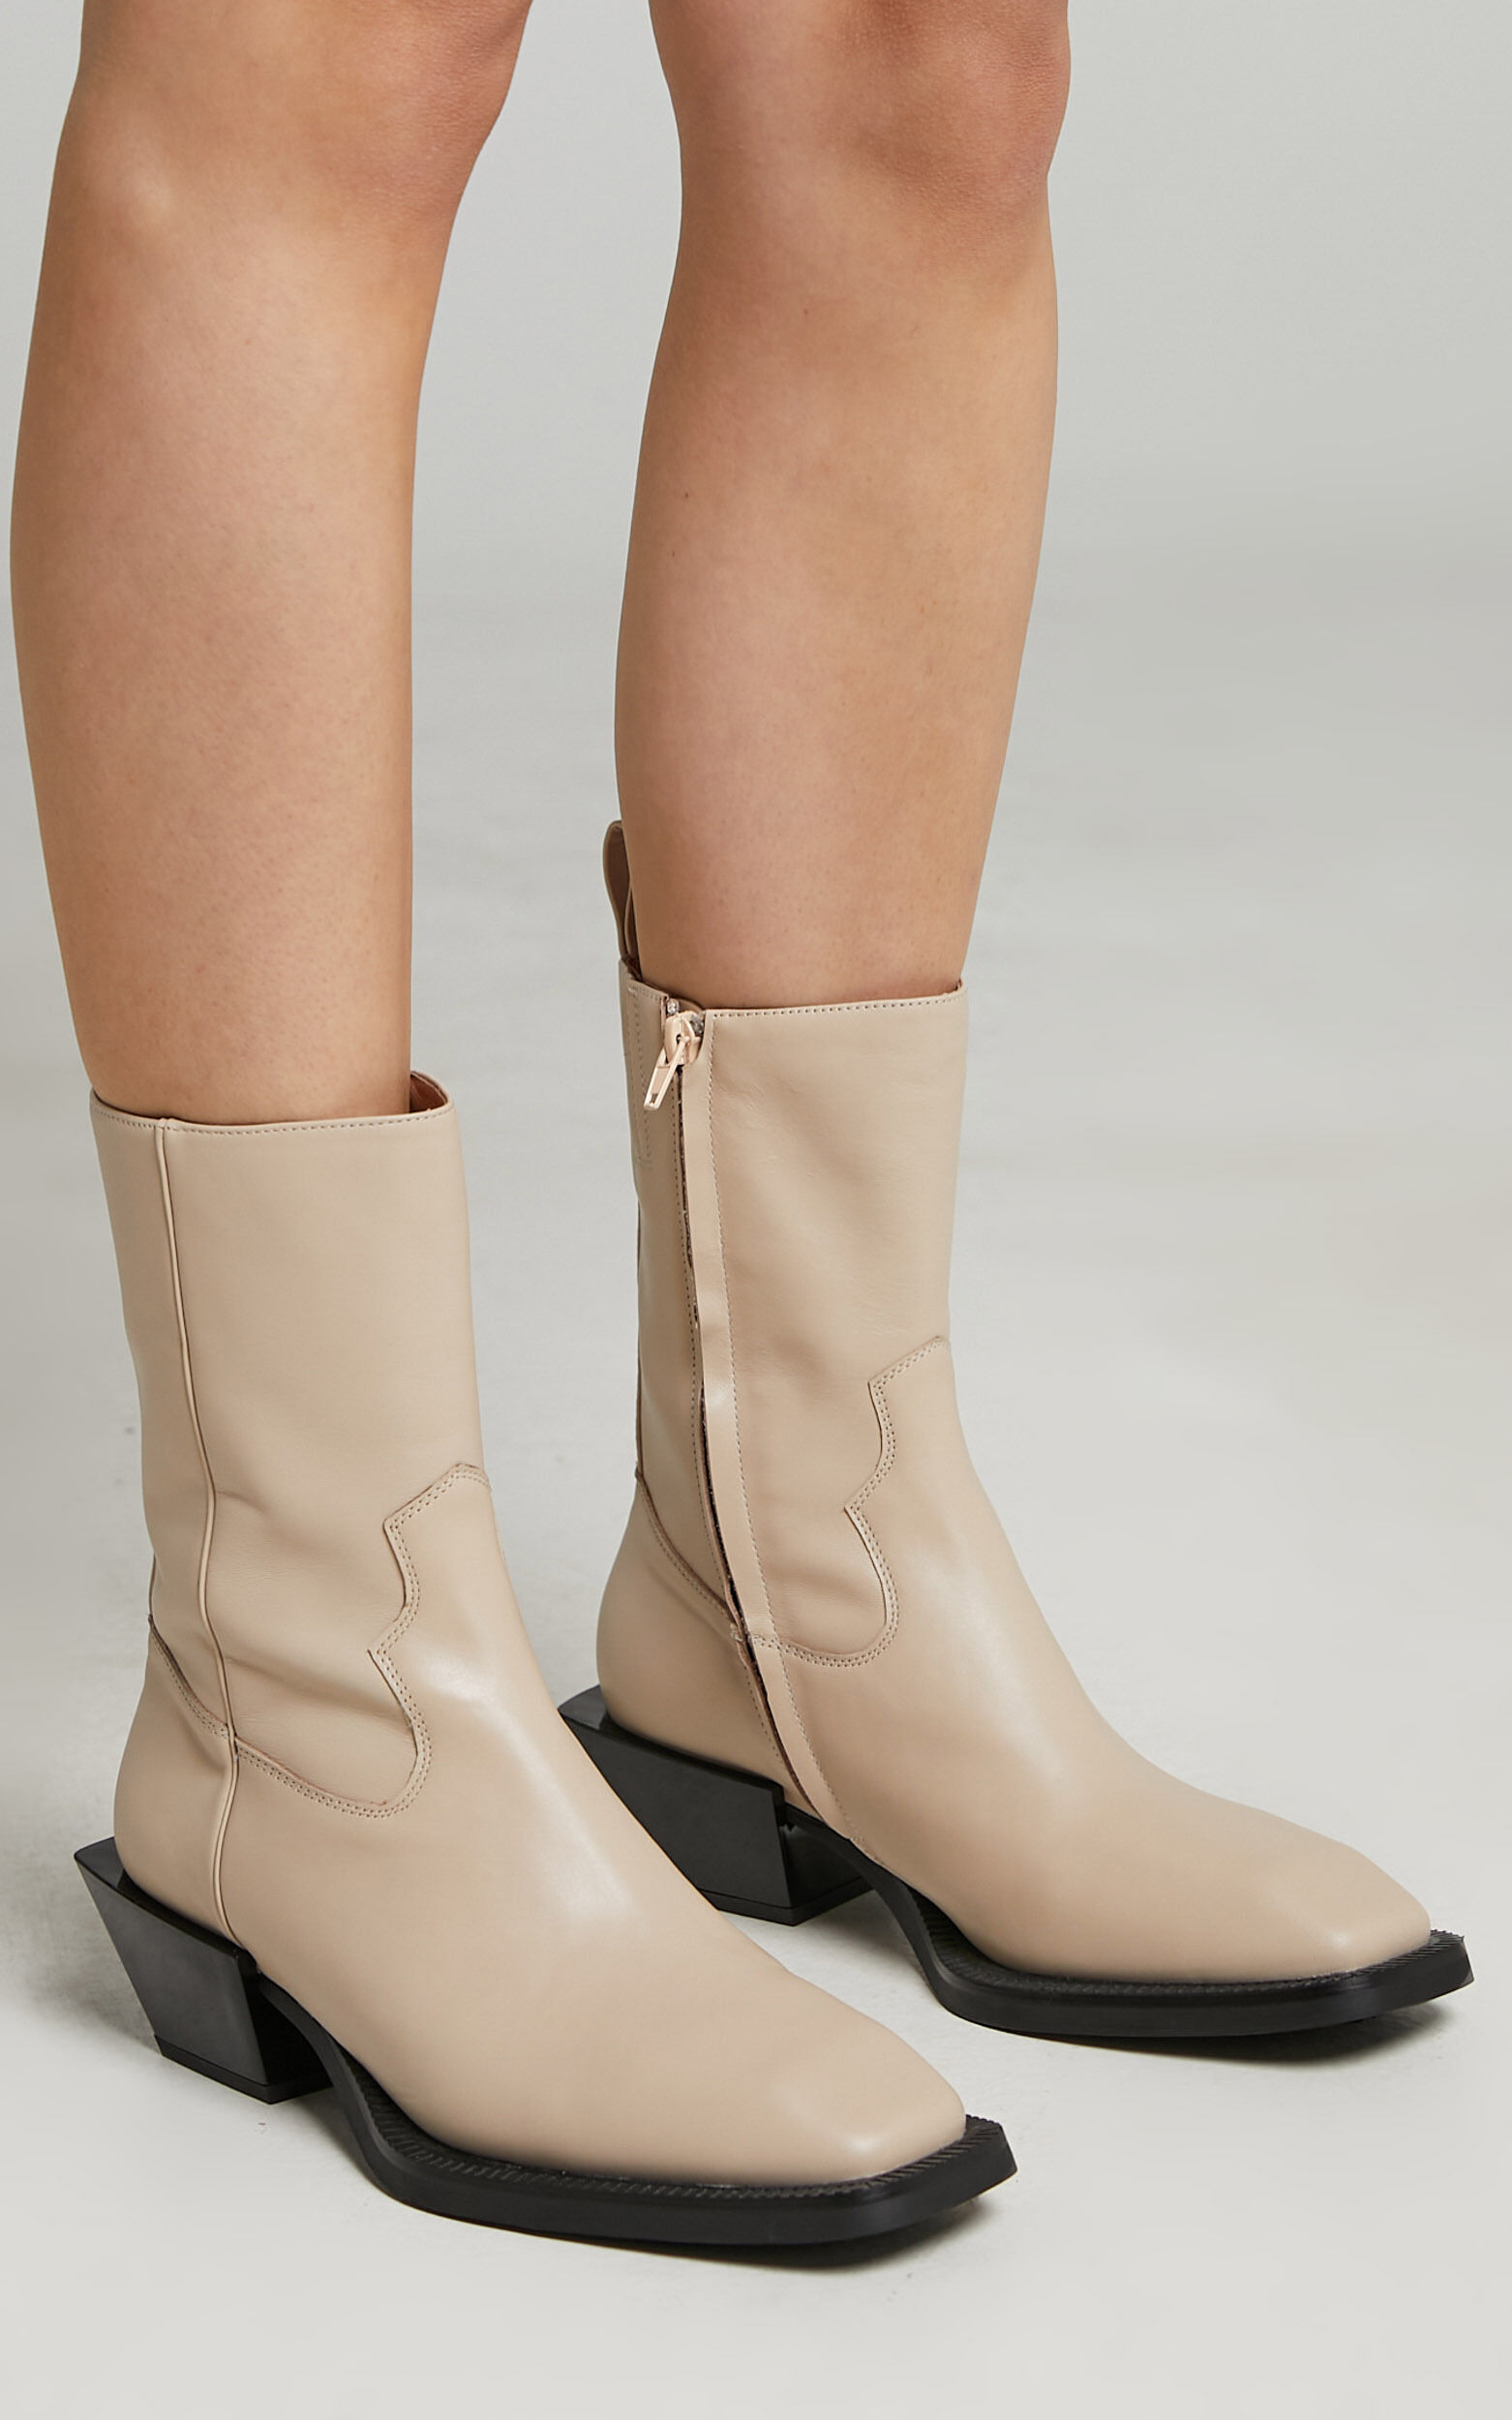 Alias Mae - Penny Boots in Cream Leather - 05, CRE2, super-hi-res image number null